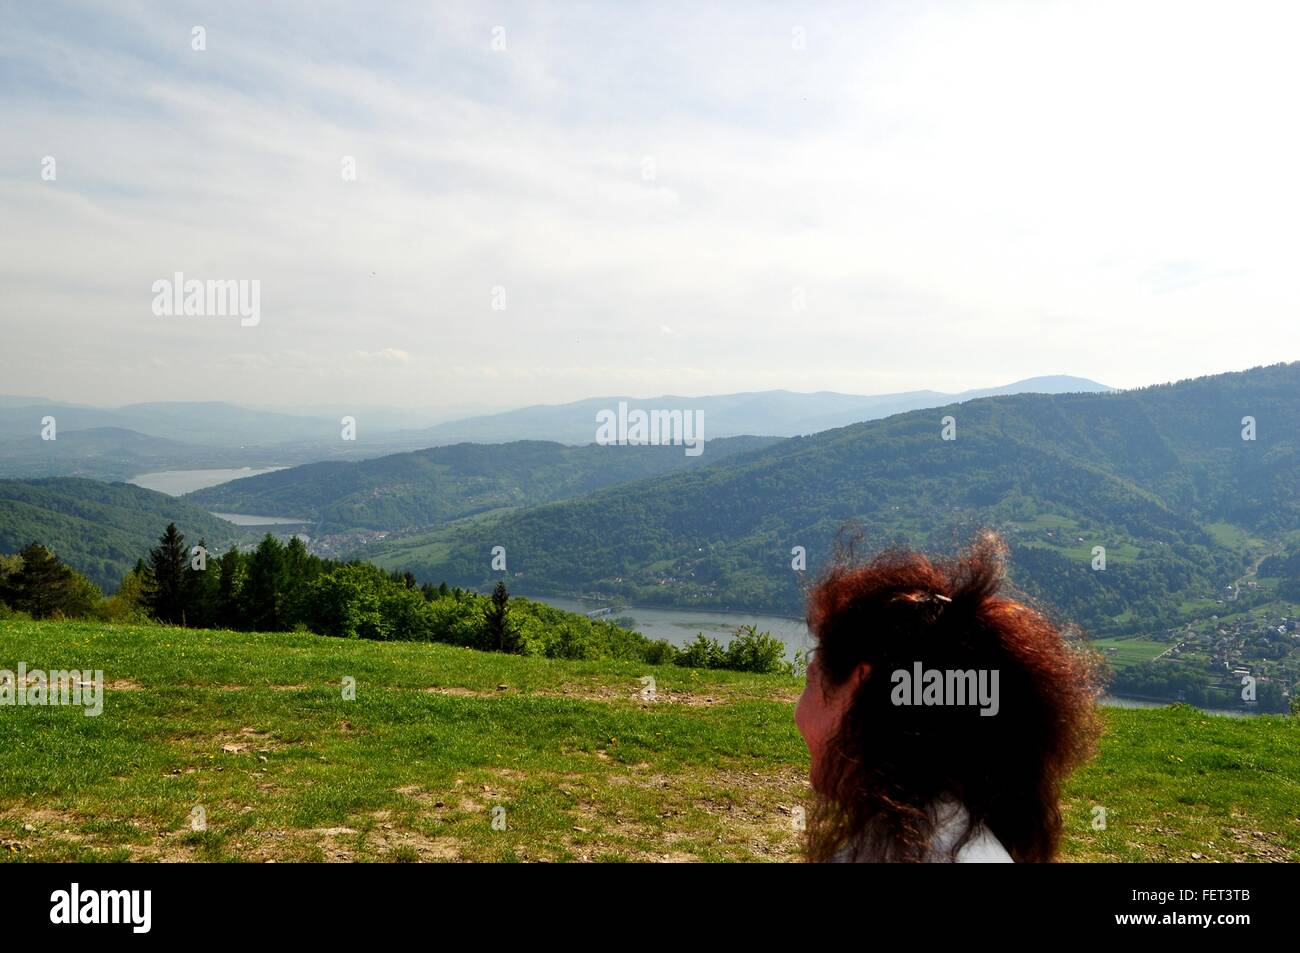 Woman With Curly Hair Looking Over Shoulder At Mountains Stock Photo